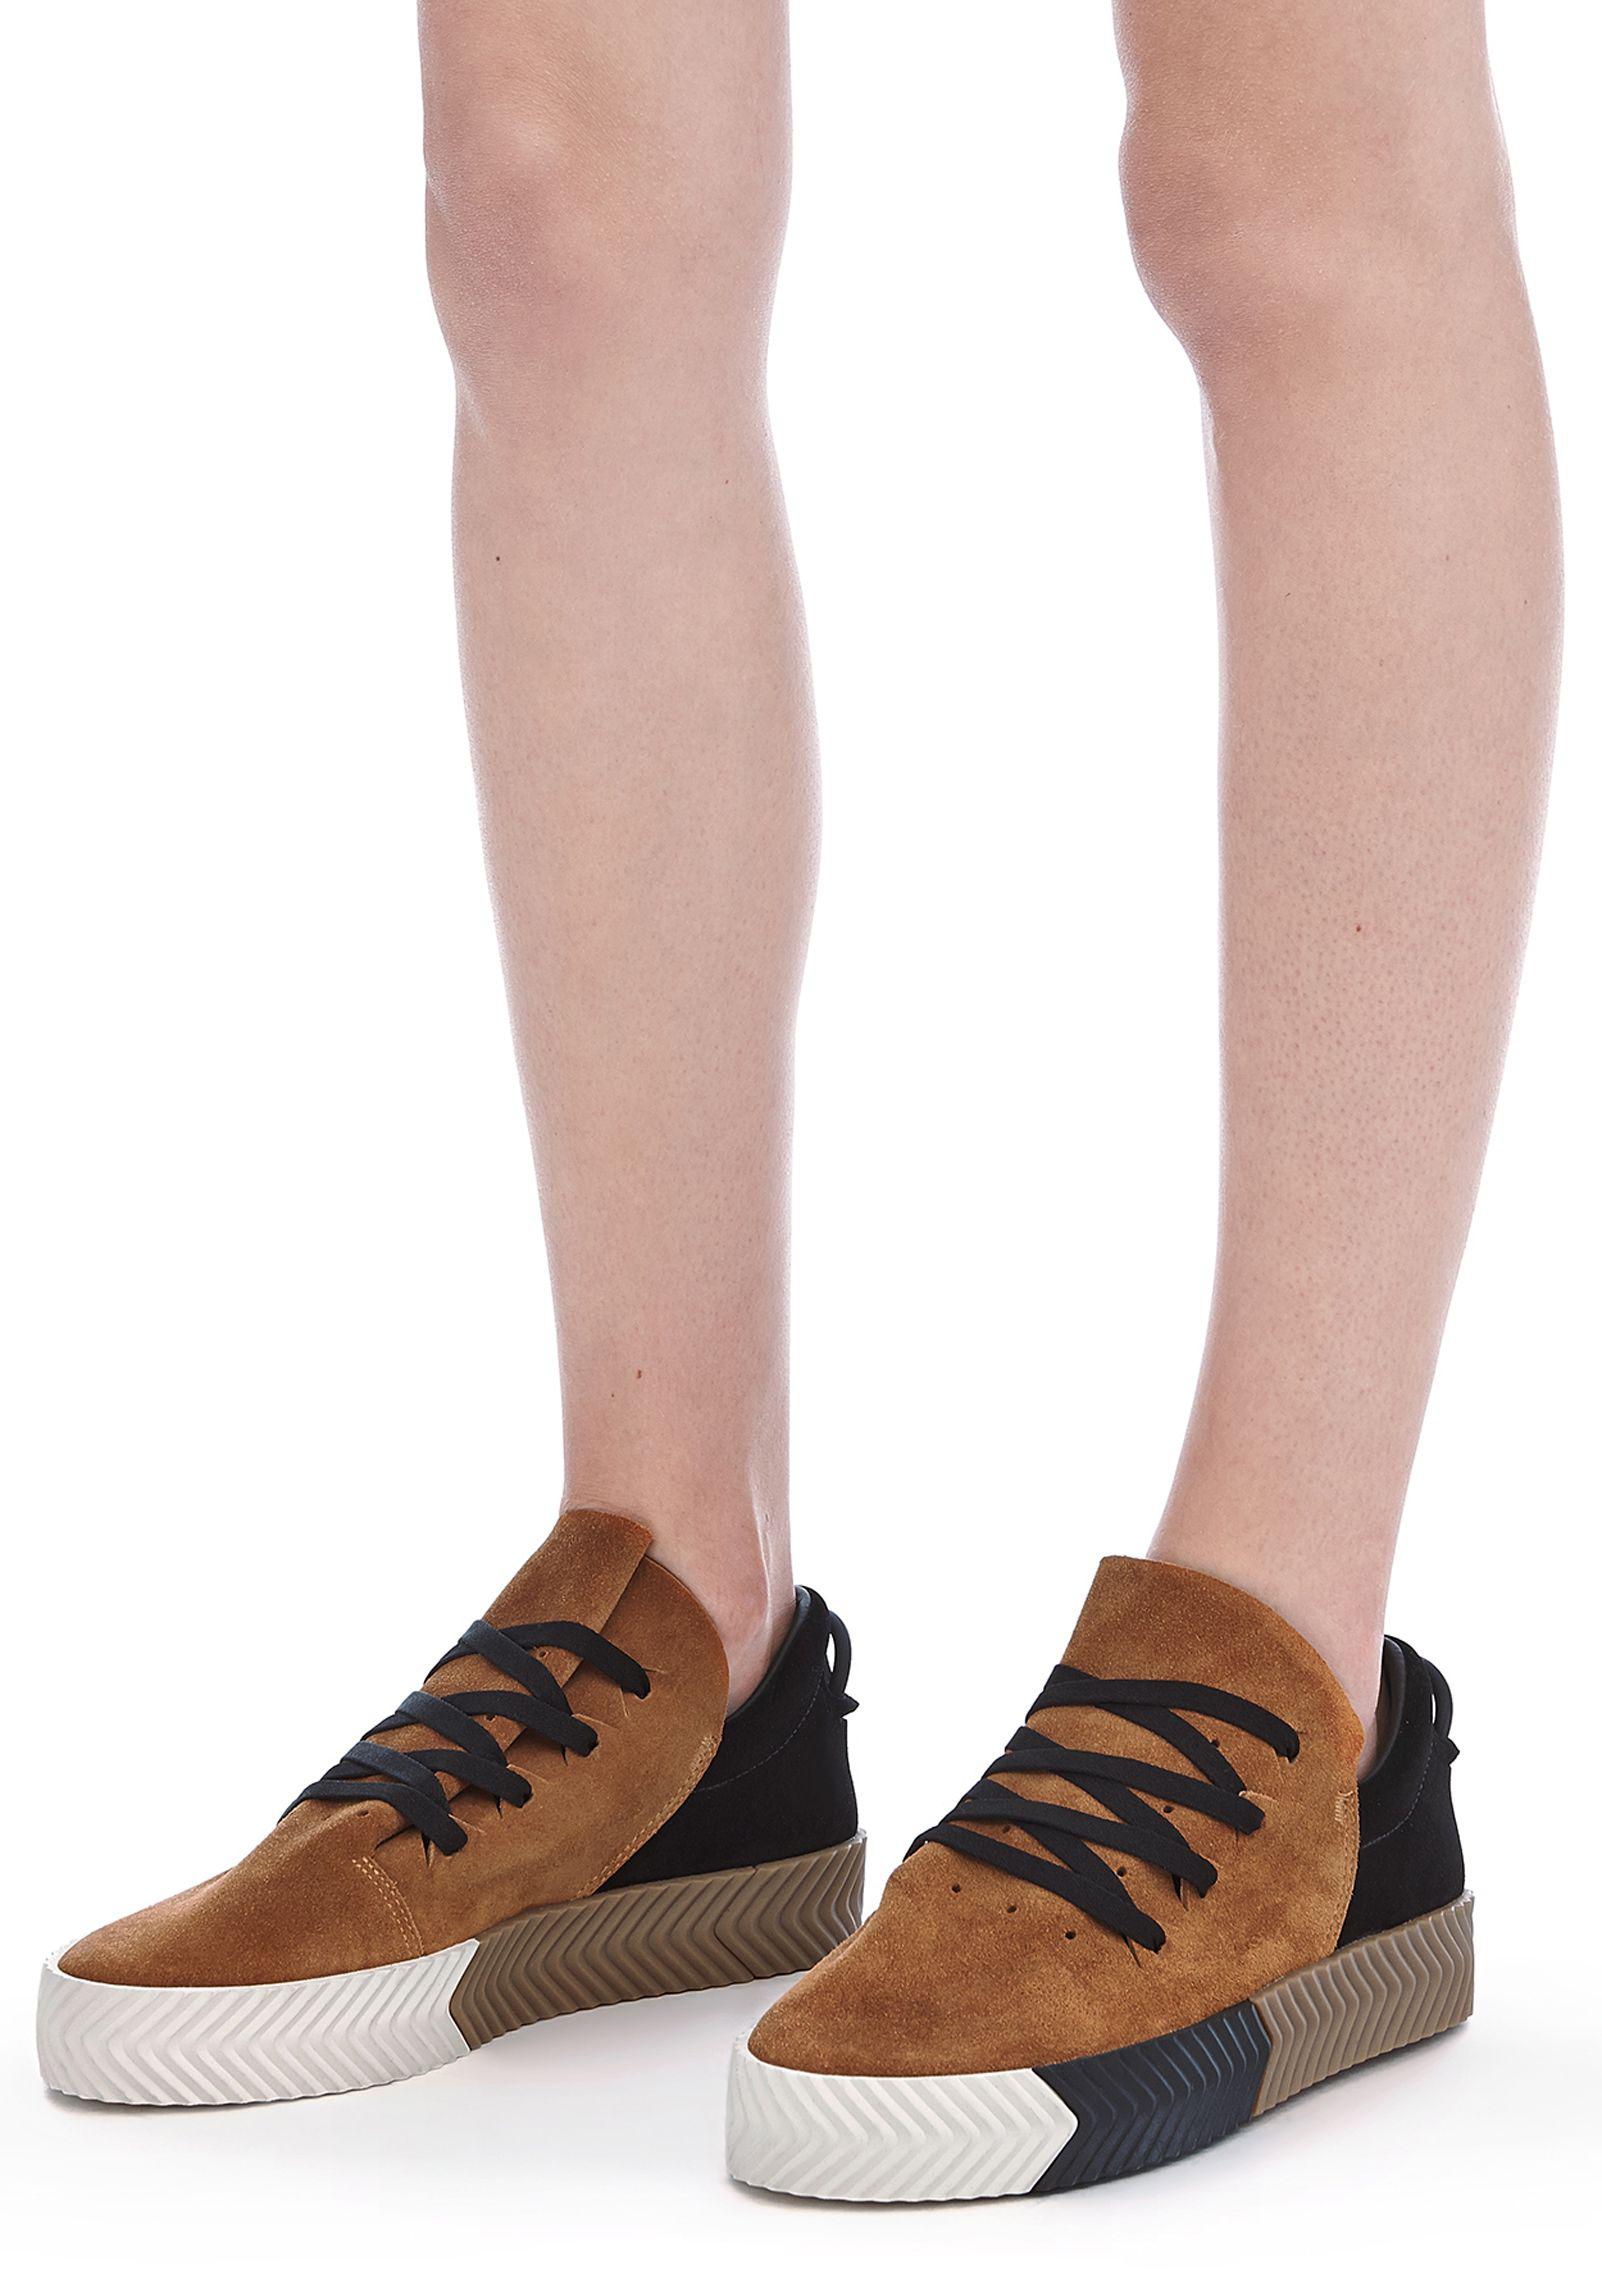 Alexander Wang Leather Adidas Originals By Aw Skate Shoes - Lyst